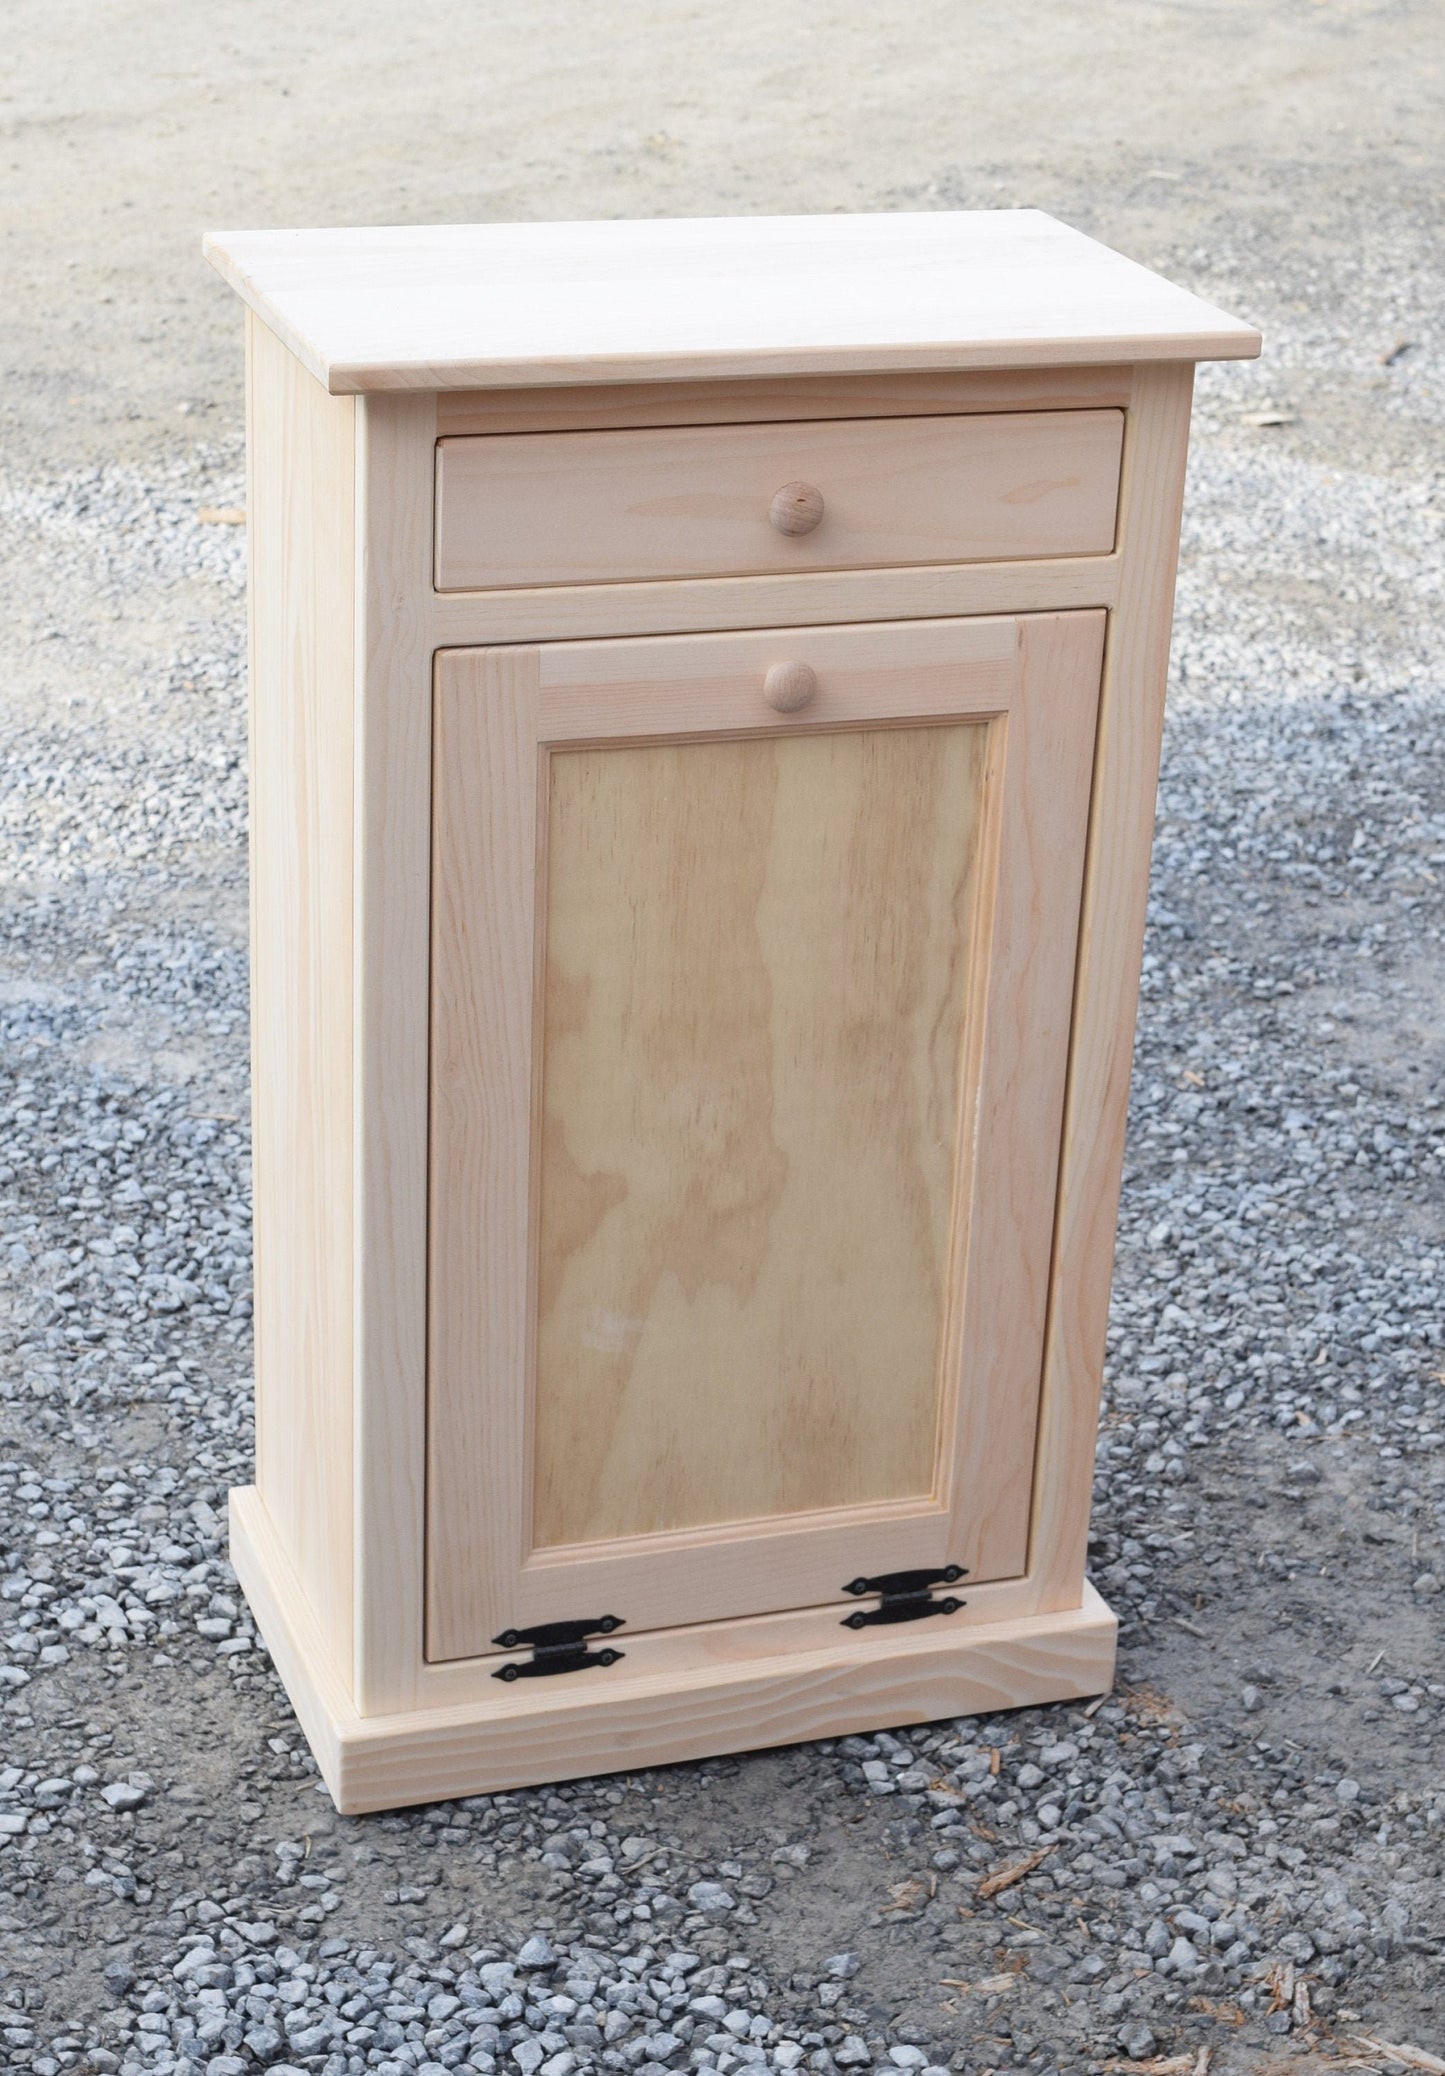 Extra Large Unfinished Trash Bin with Trim